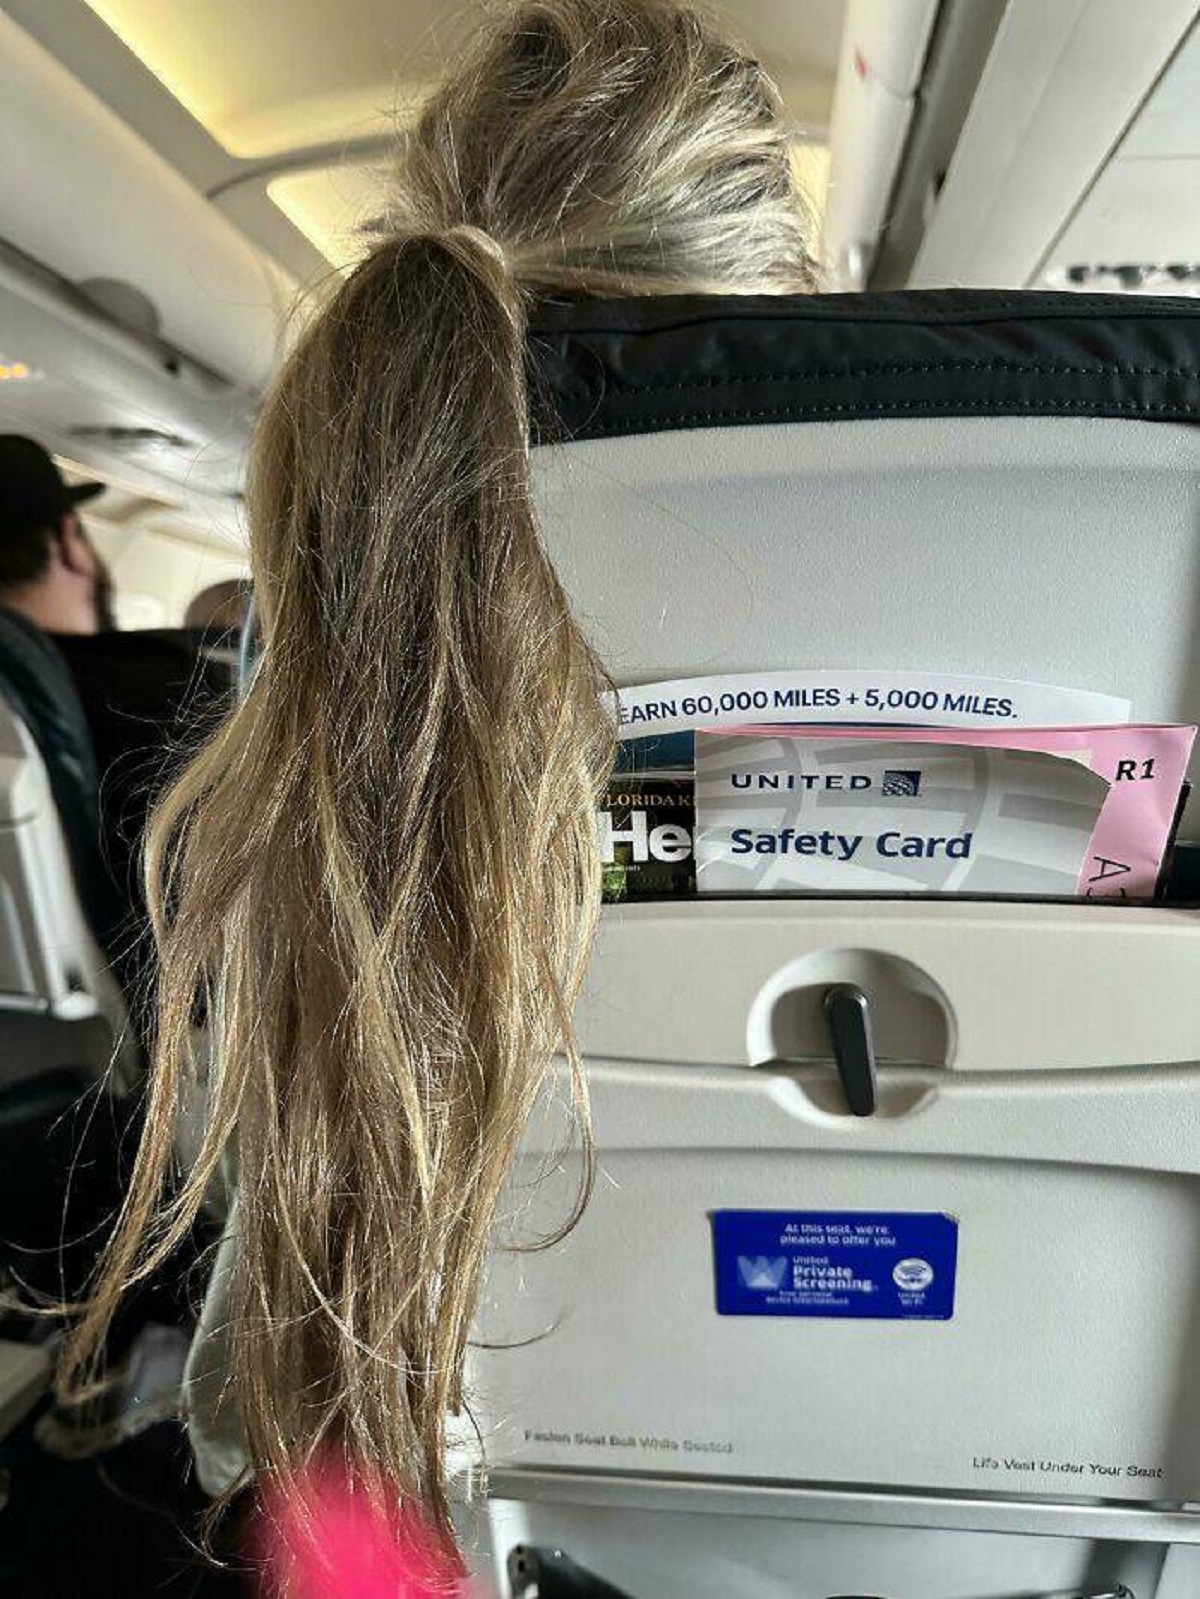 50 Airplane Passengers Who Are The Worst.